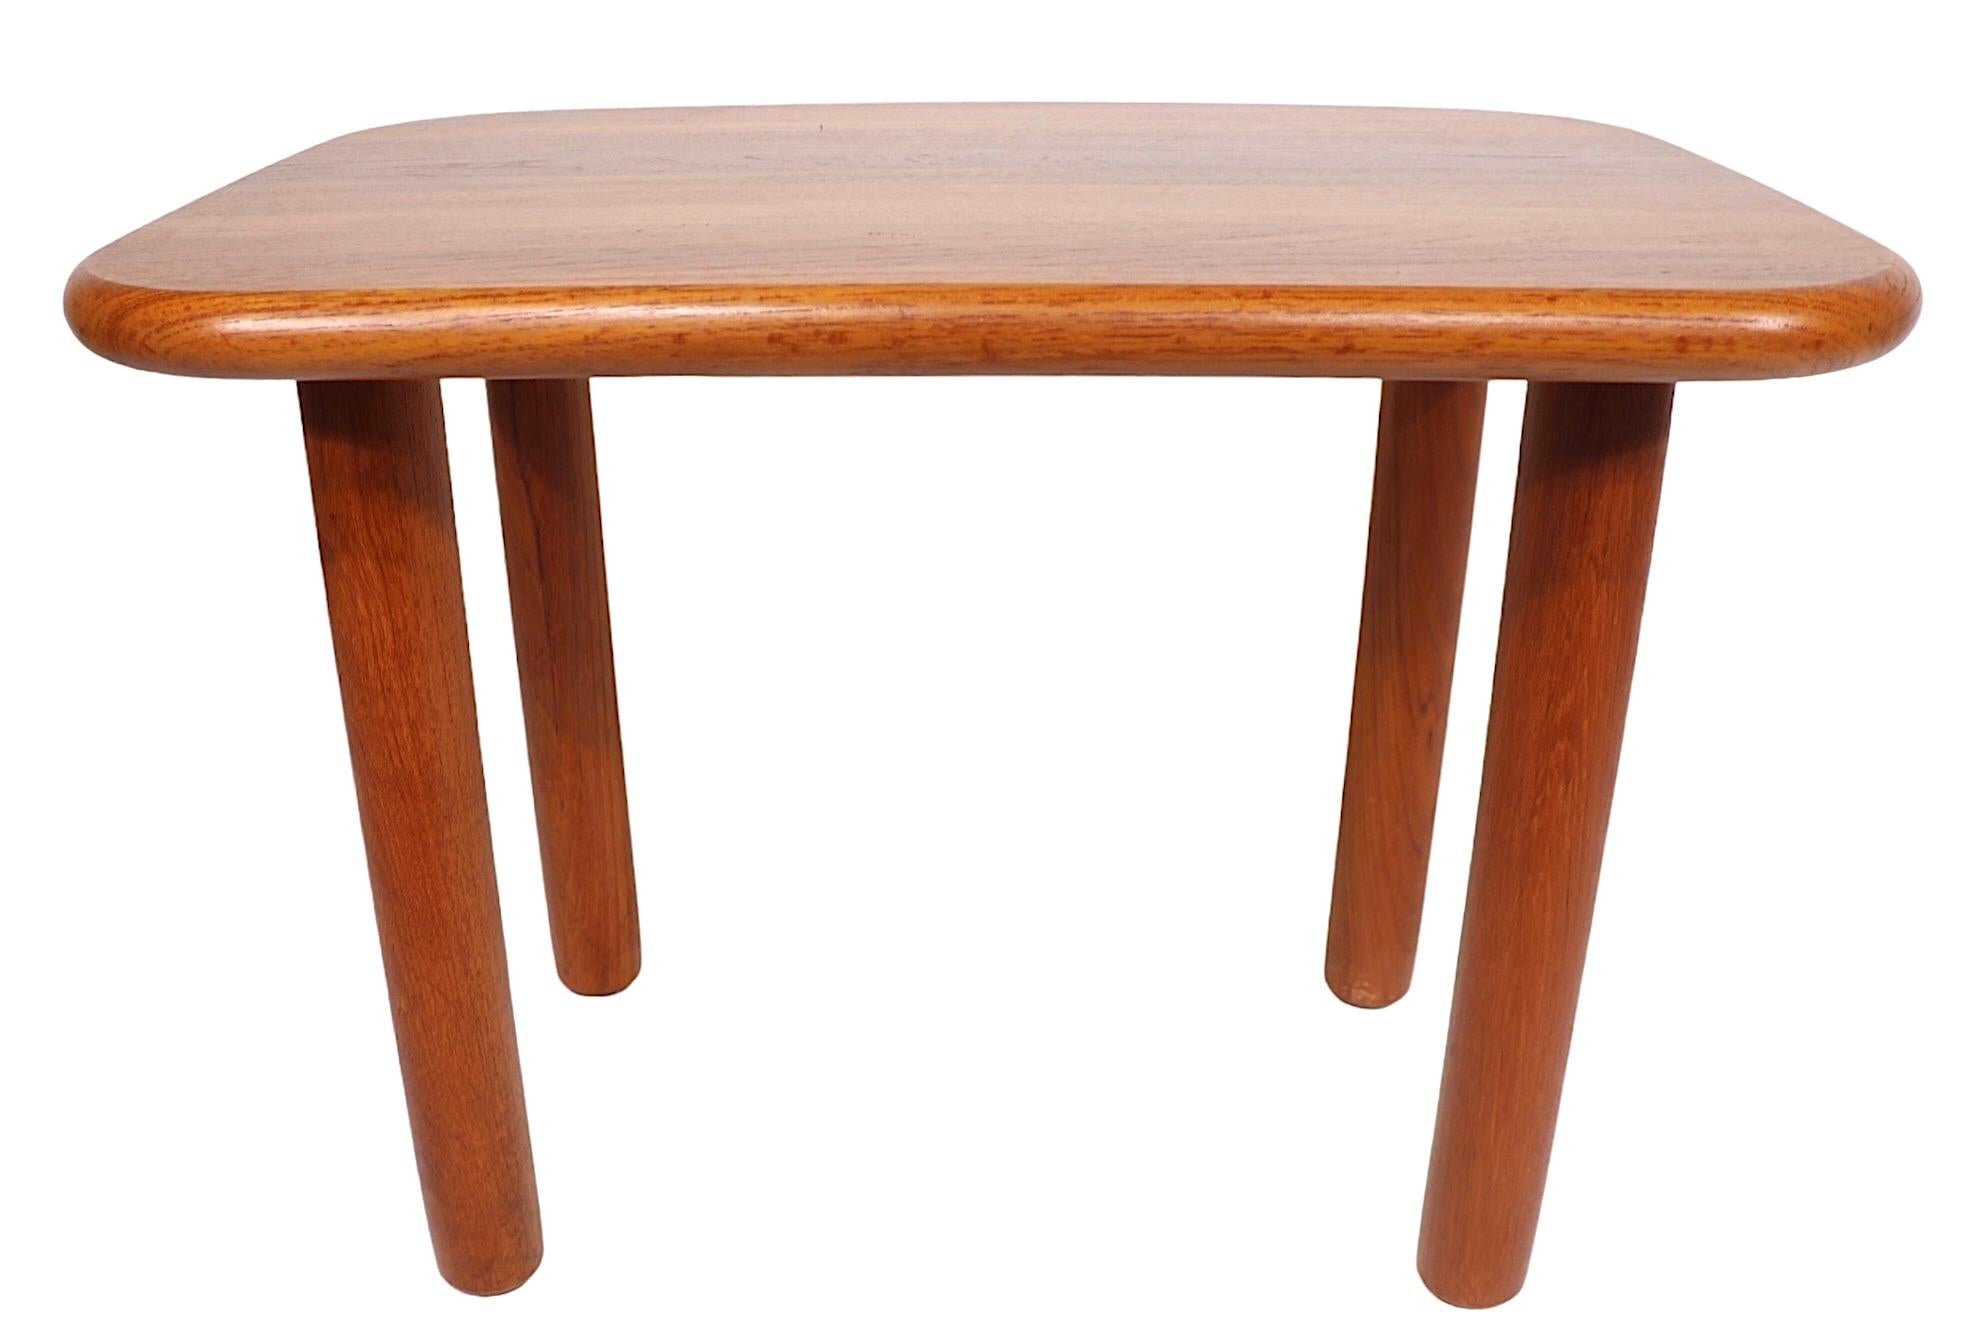  1970's Danish Modern Teak  End Table by Neils Bach  For Sale 1